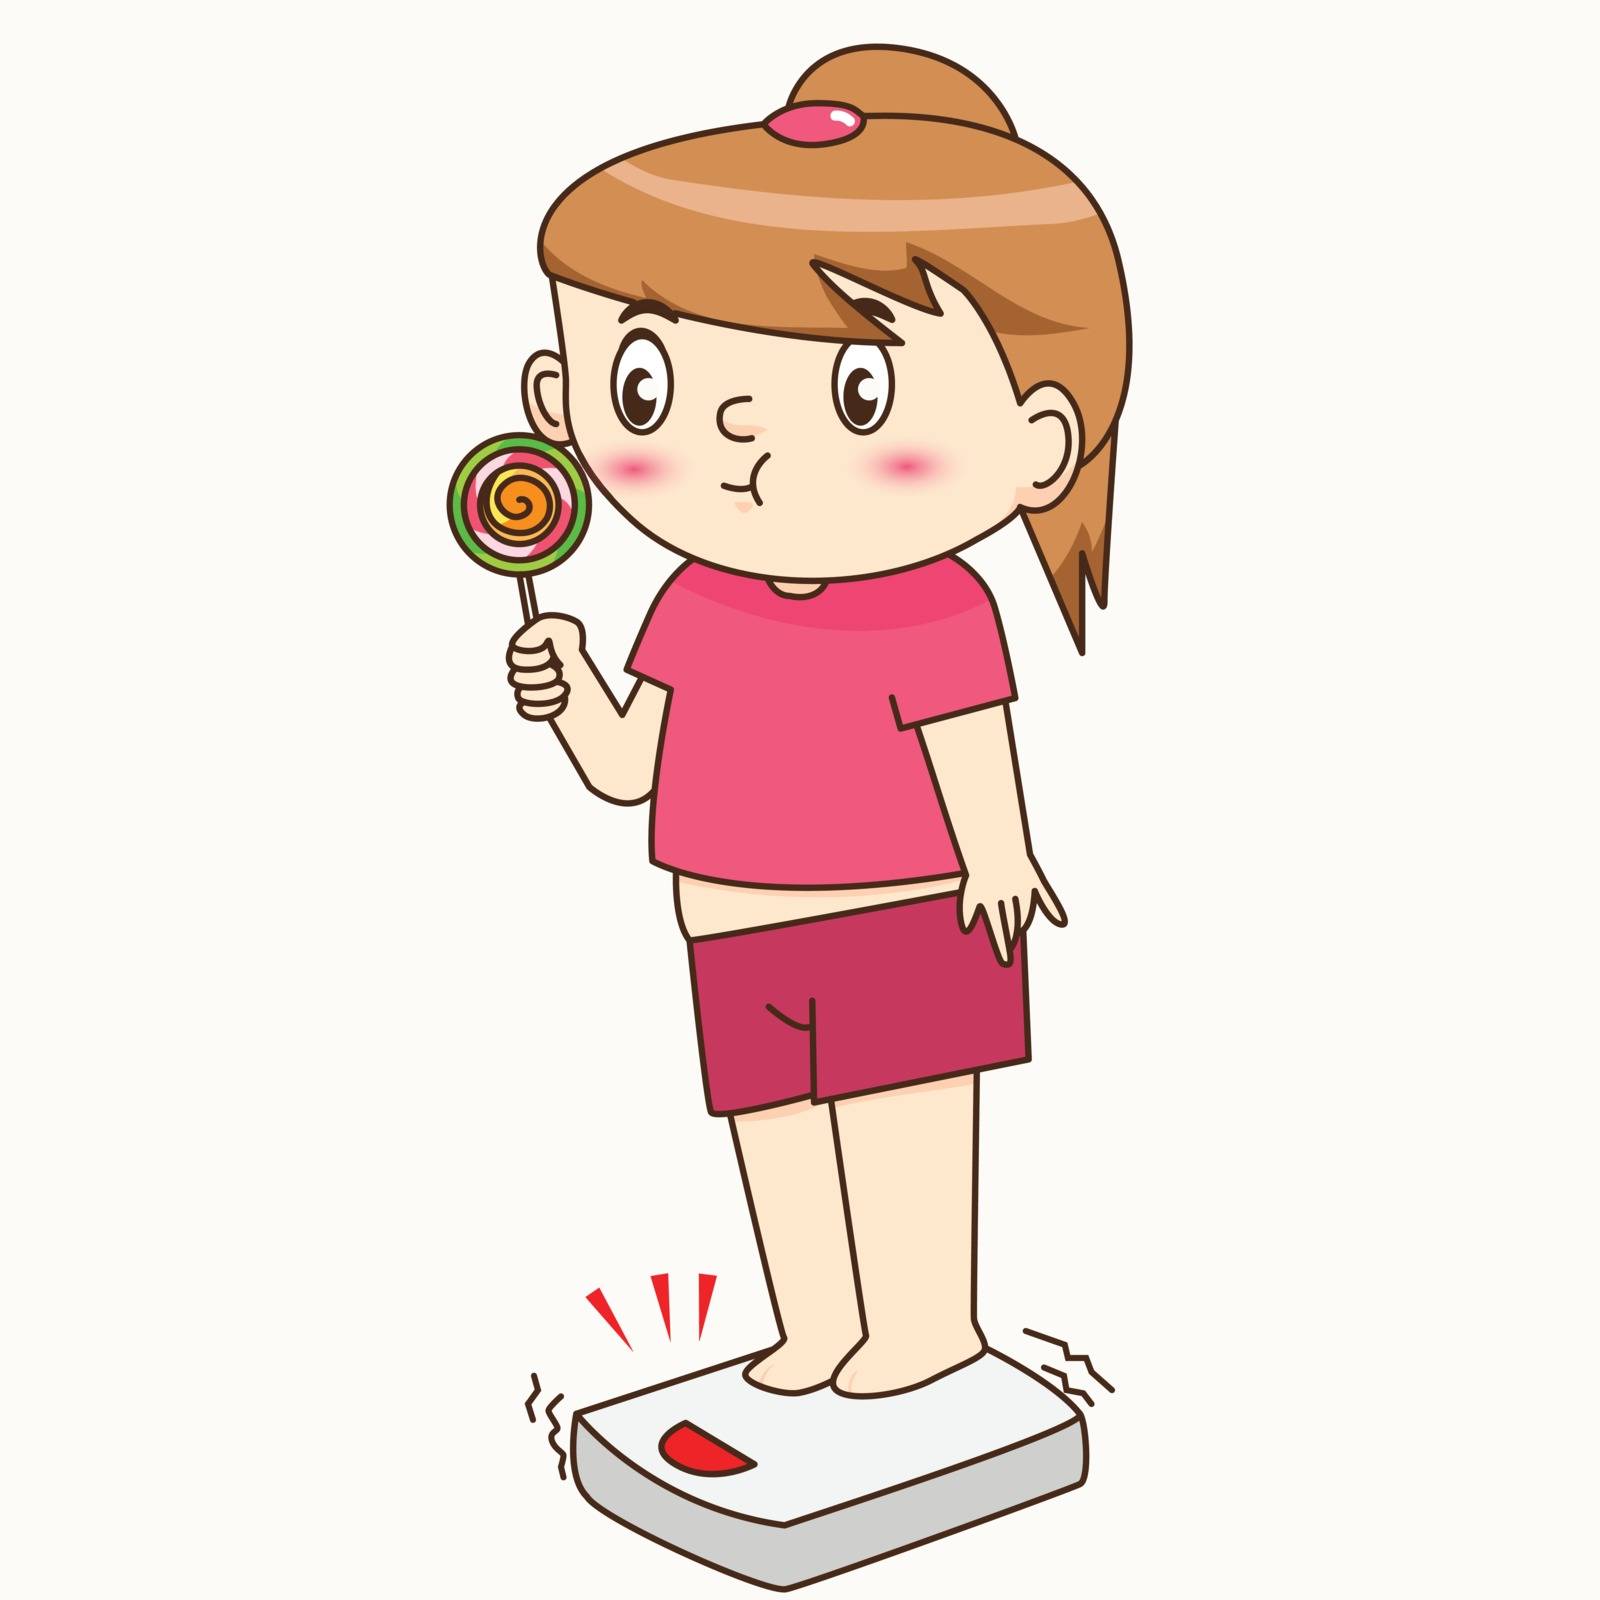 Fat girl eating lollipop and feet on the floor scales